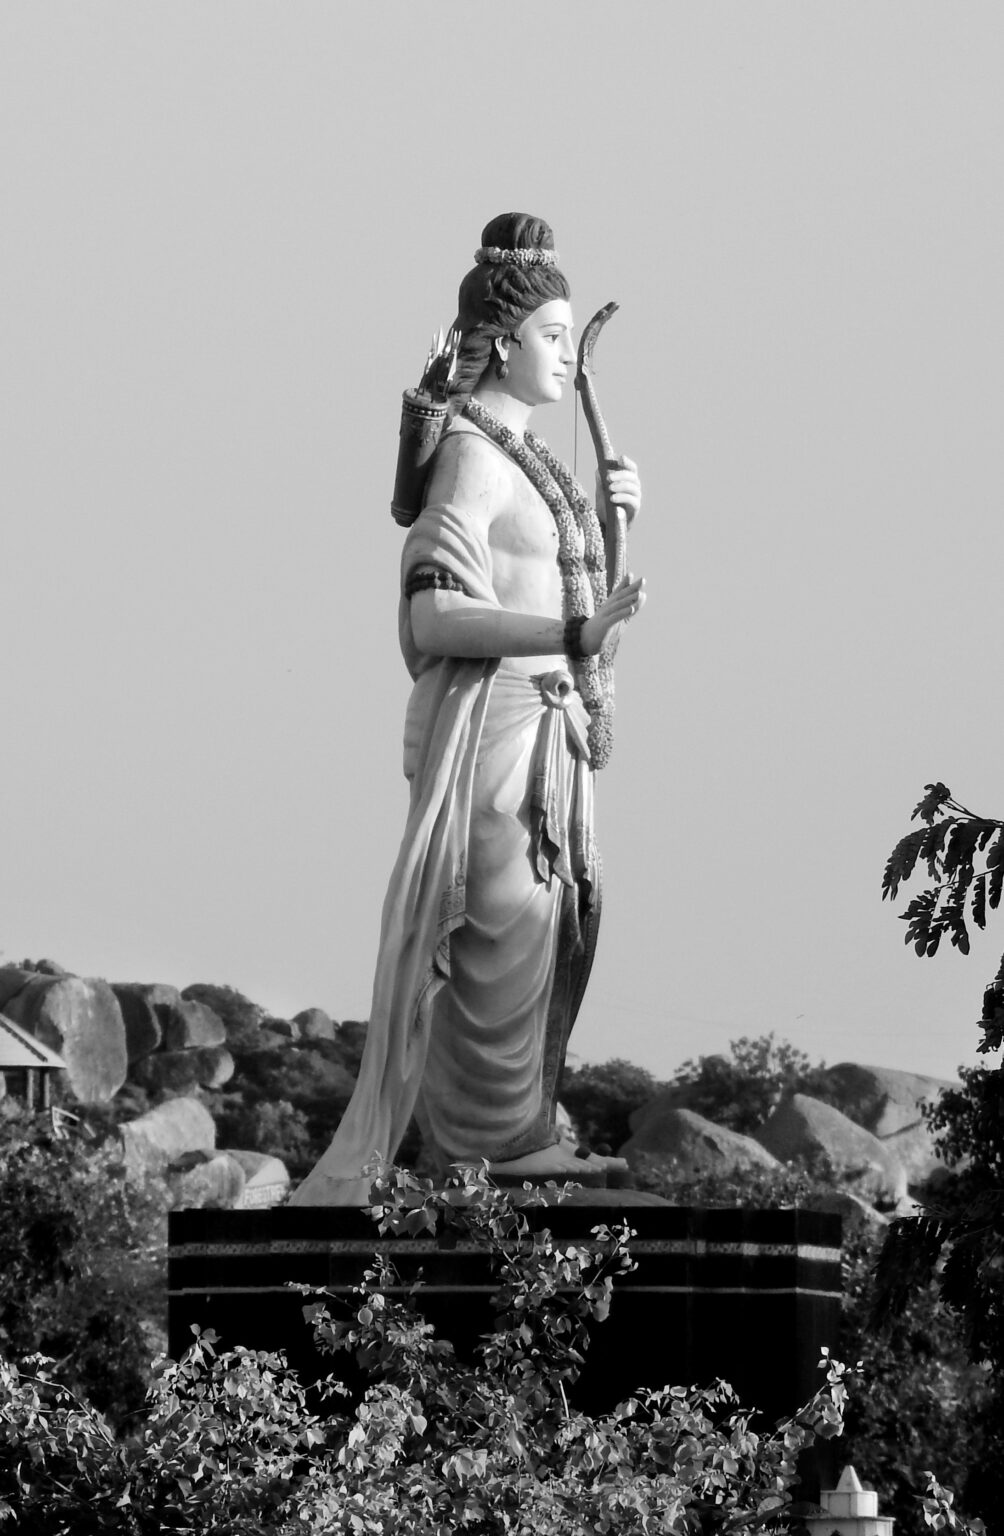 Lord Rama carrying his bow